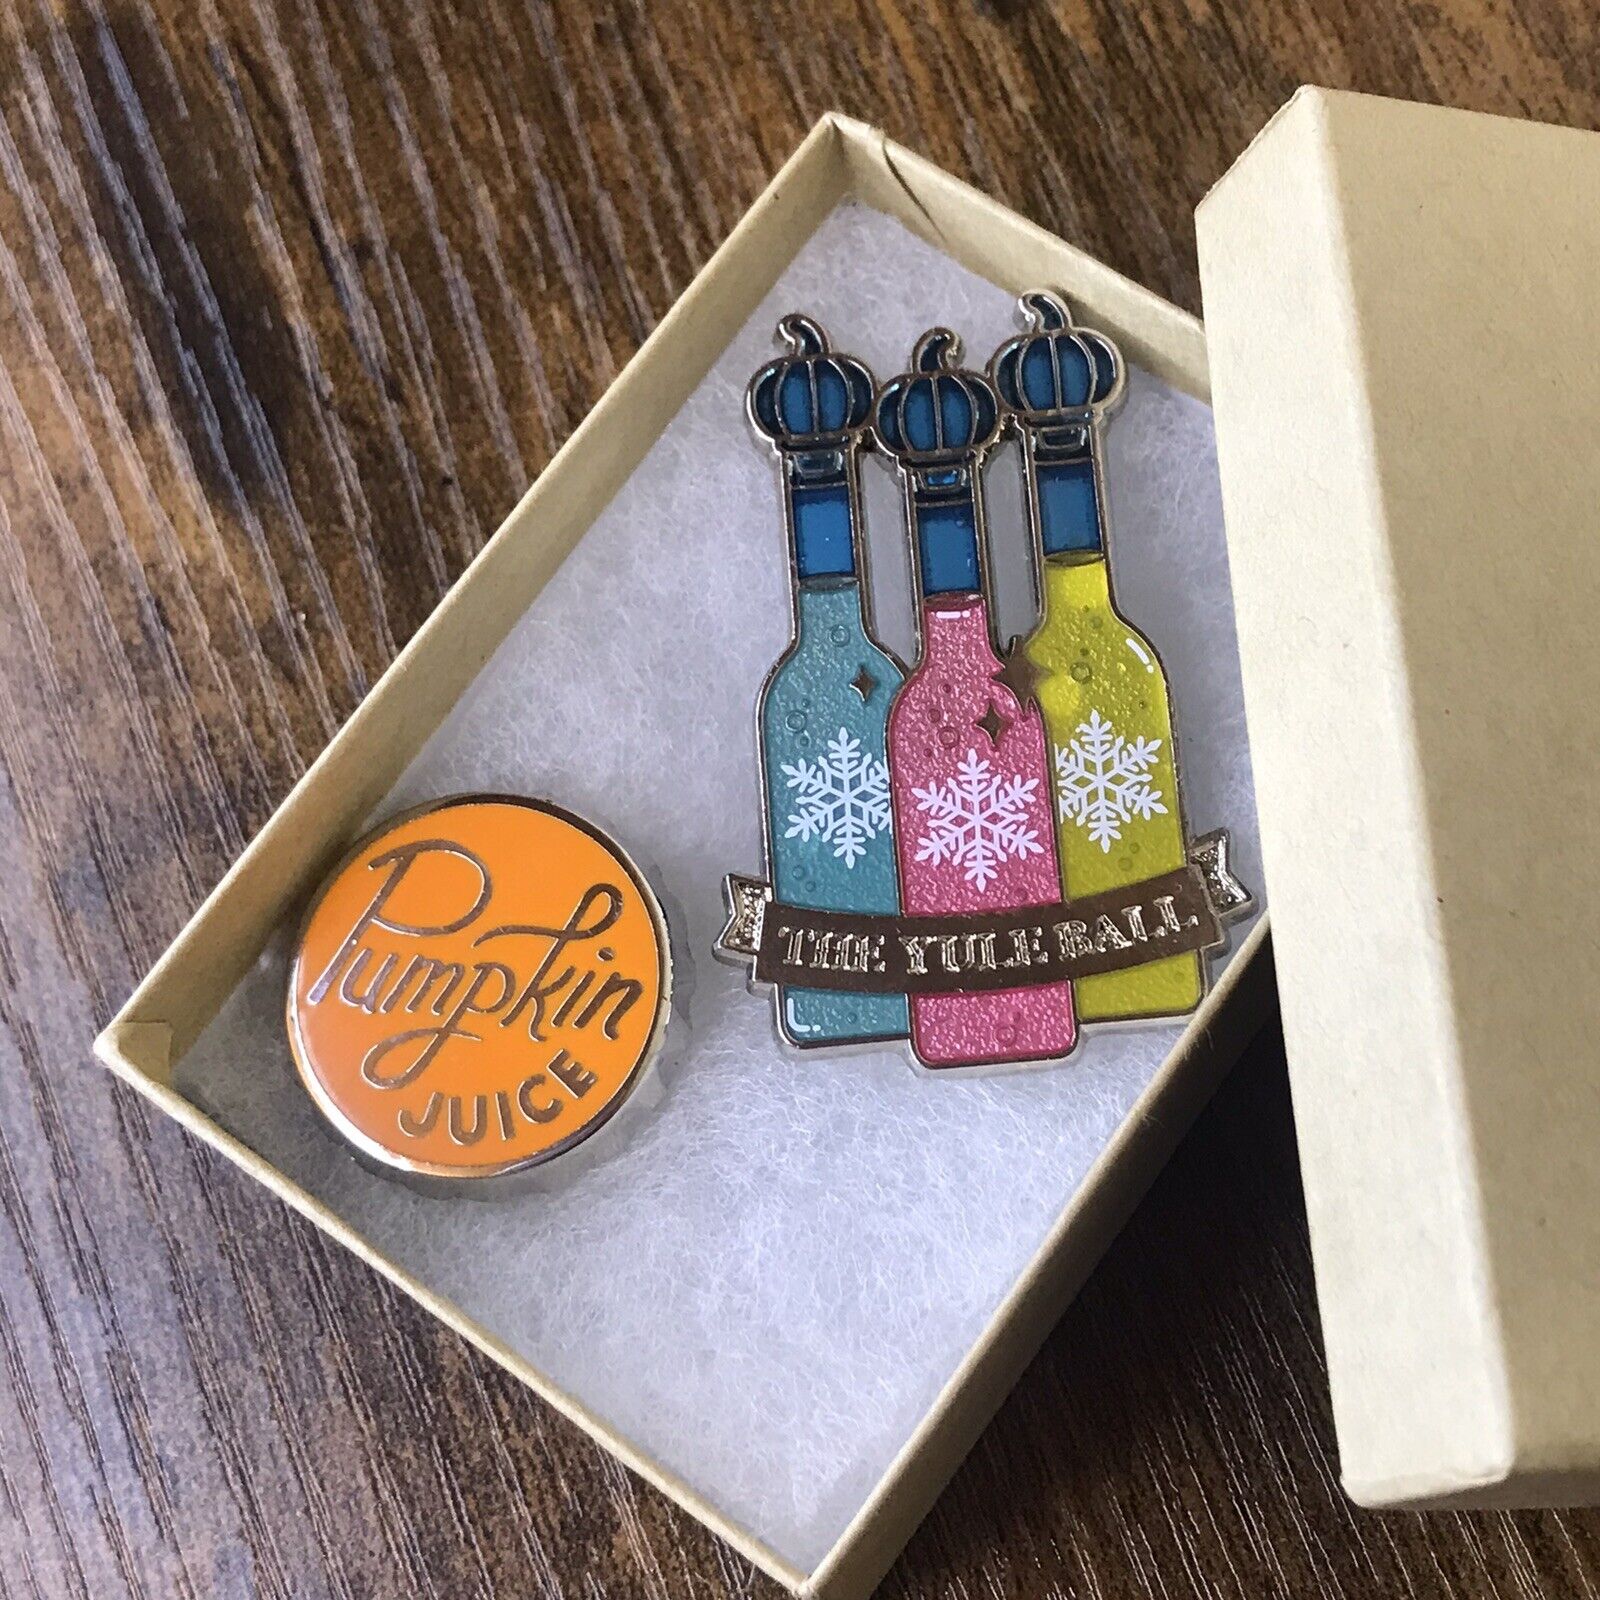 HARRY POTTER PIN ~ THE YULE BALL PIN AND PUMPKIN JUICE COLLECTABLE PIN BUNDLE